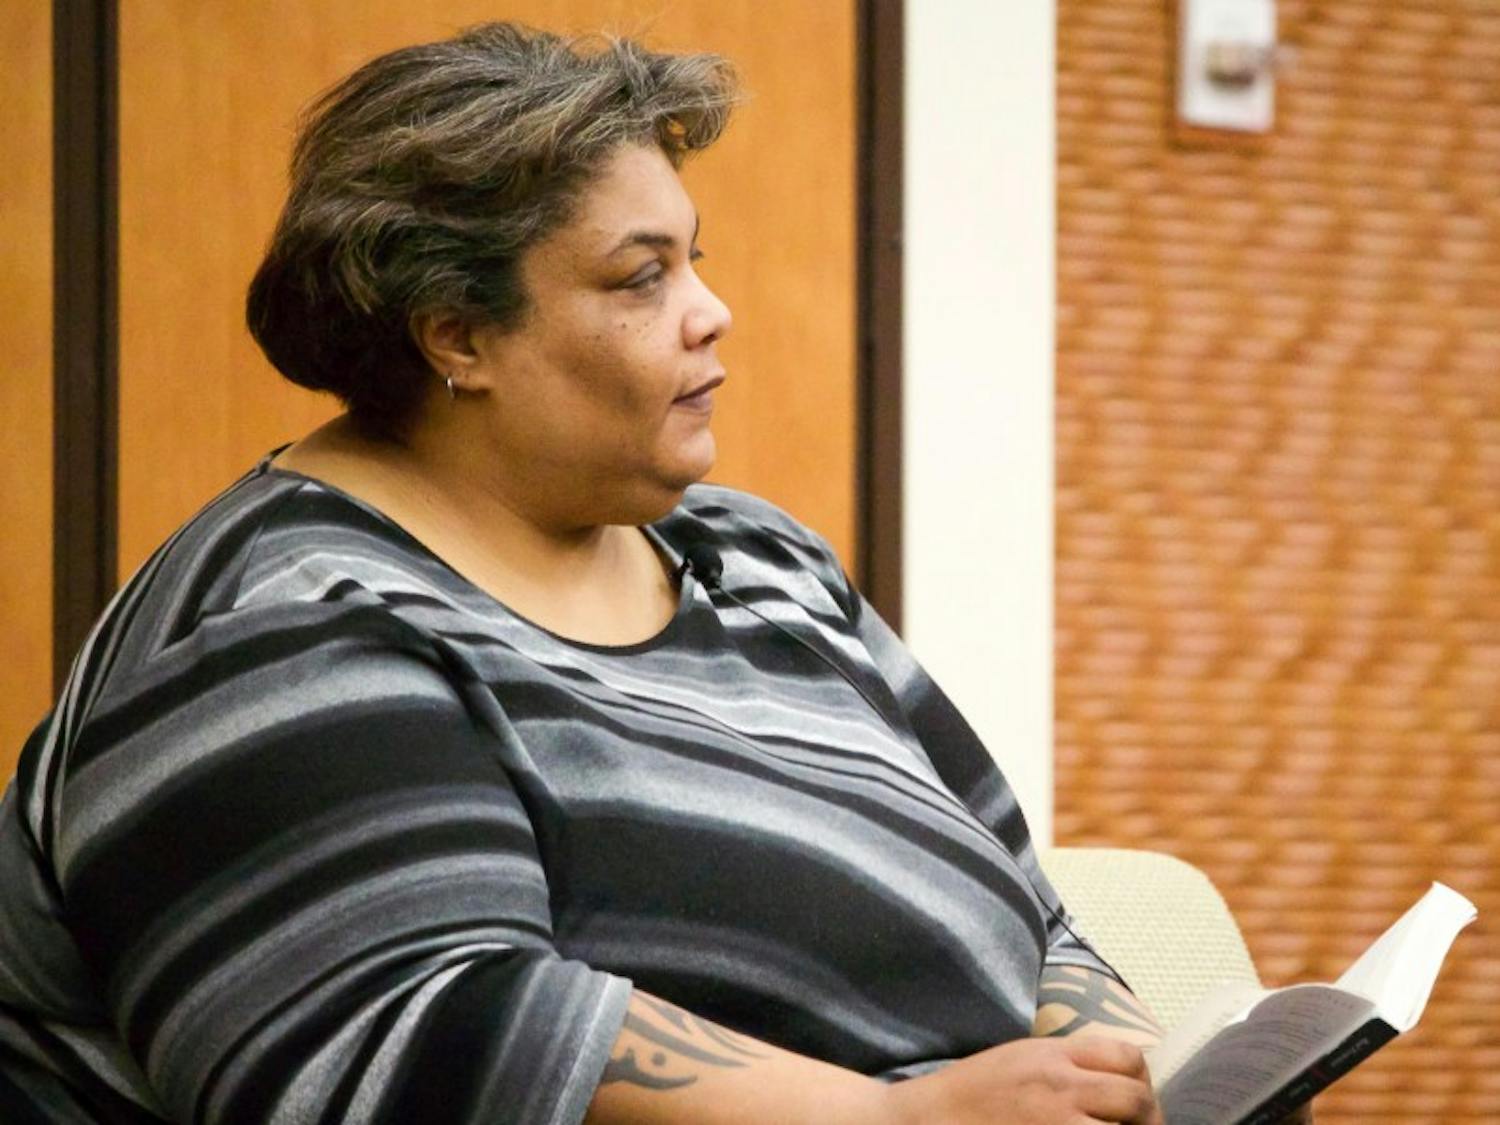 New York Times best-selling author Roxane Gay read from her book “Bad Feminist” as part of the Wisconsin Union Directorate Publications Committee Lit Fest Tuesday.